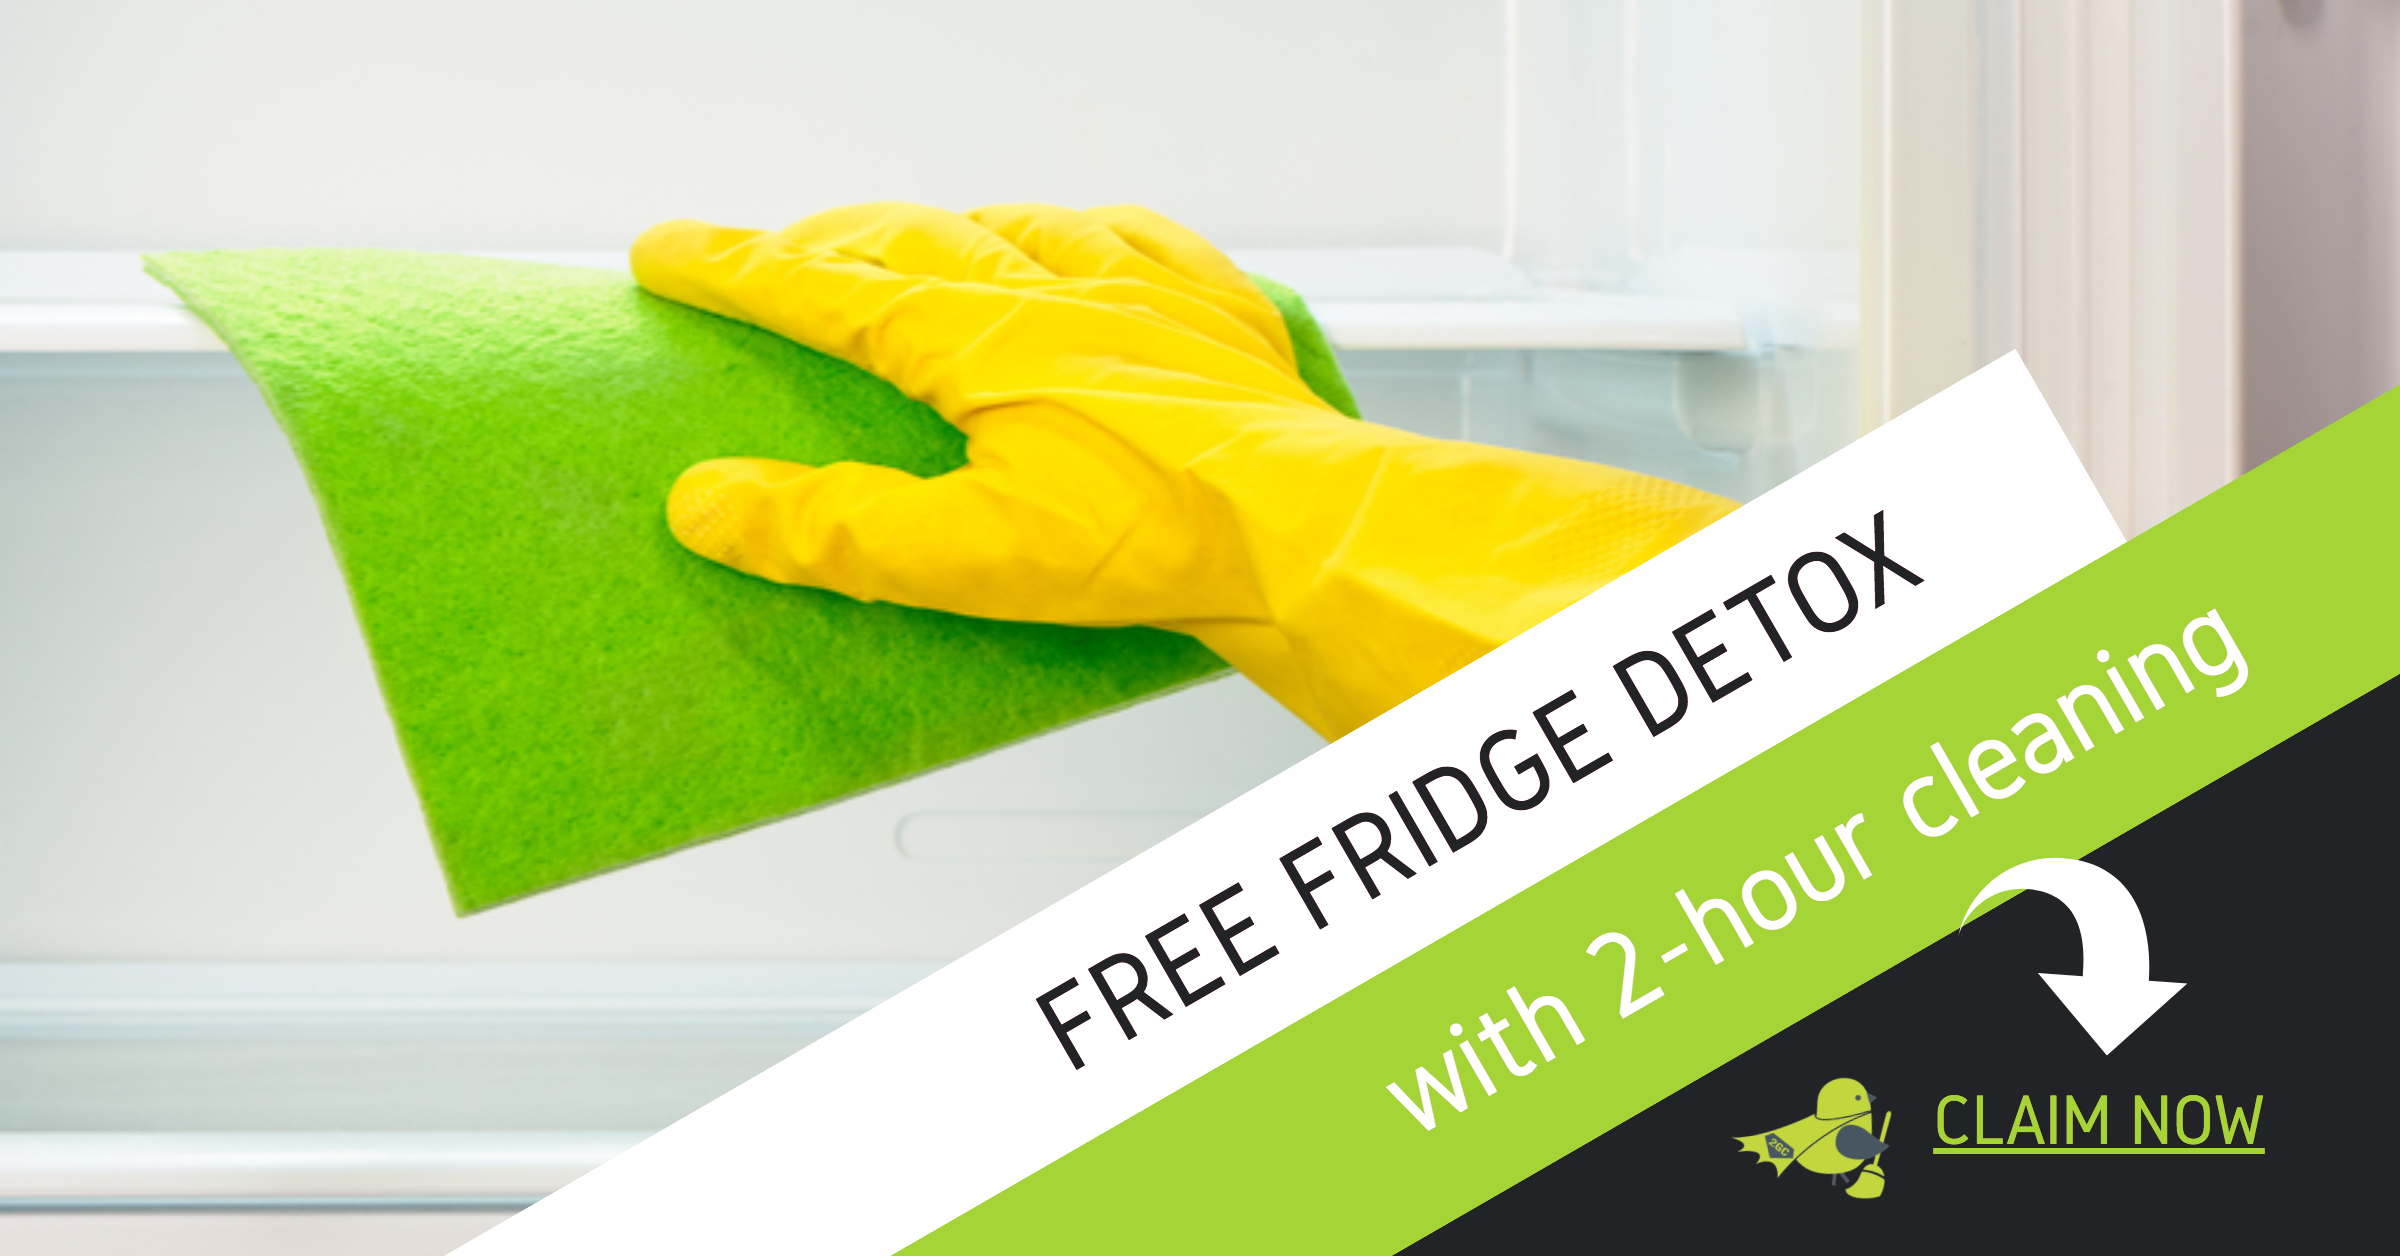 Get a FREE Fridge Detox with 2-hour Home Cleaning